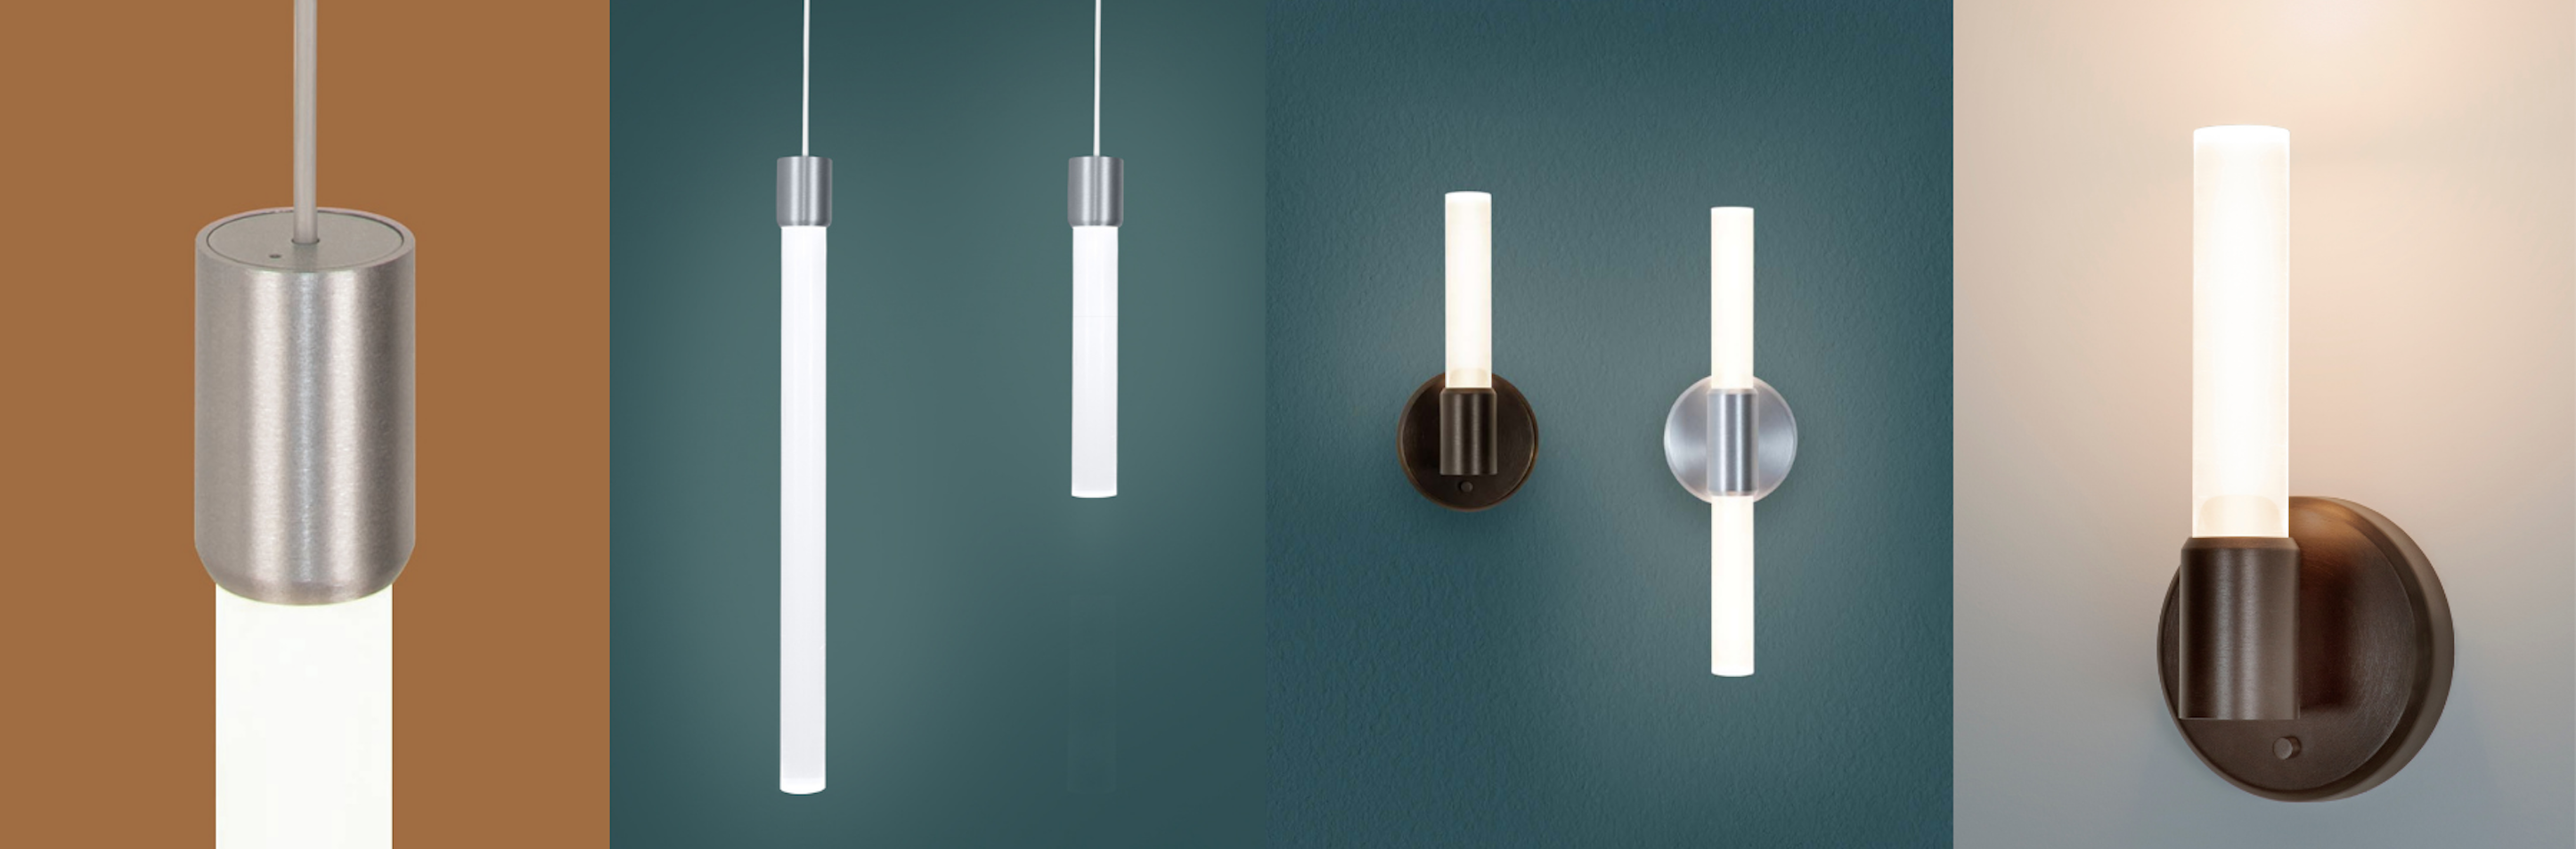 Theo is a unique acyrlic light rod pendant made by Visa Lighting